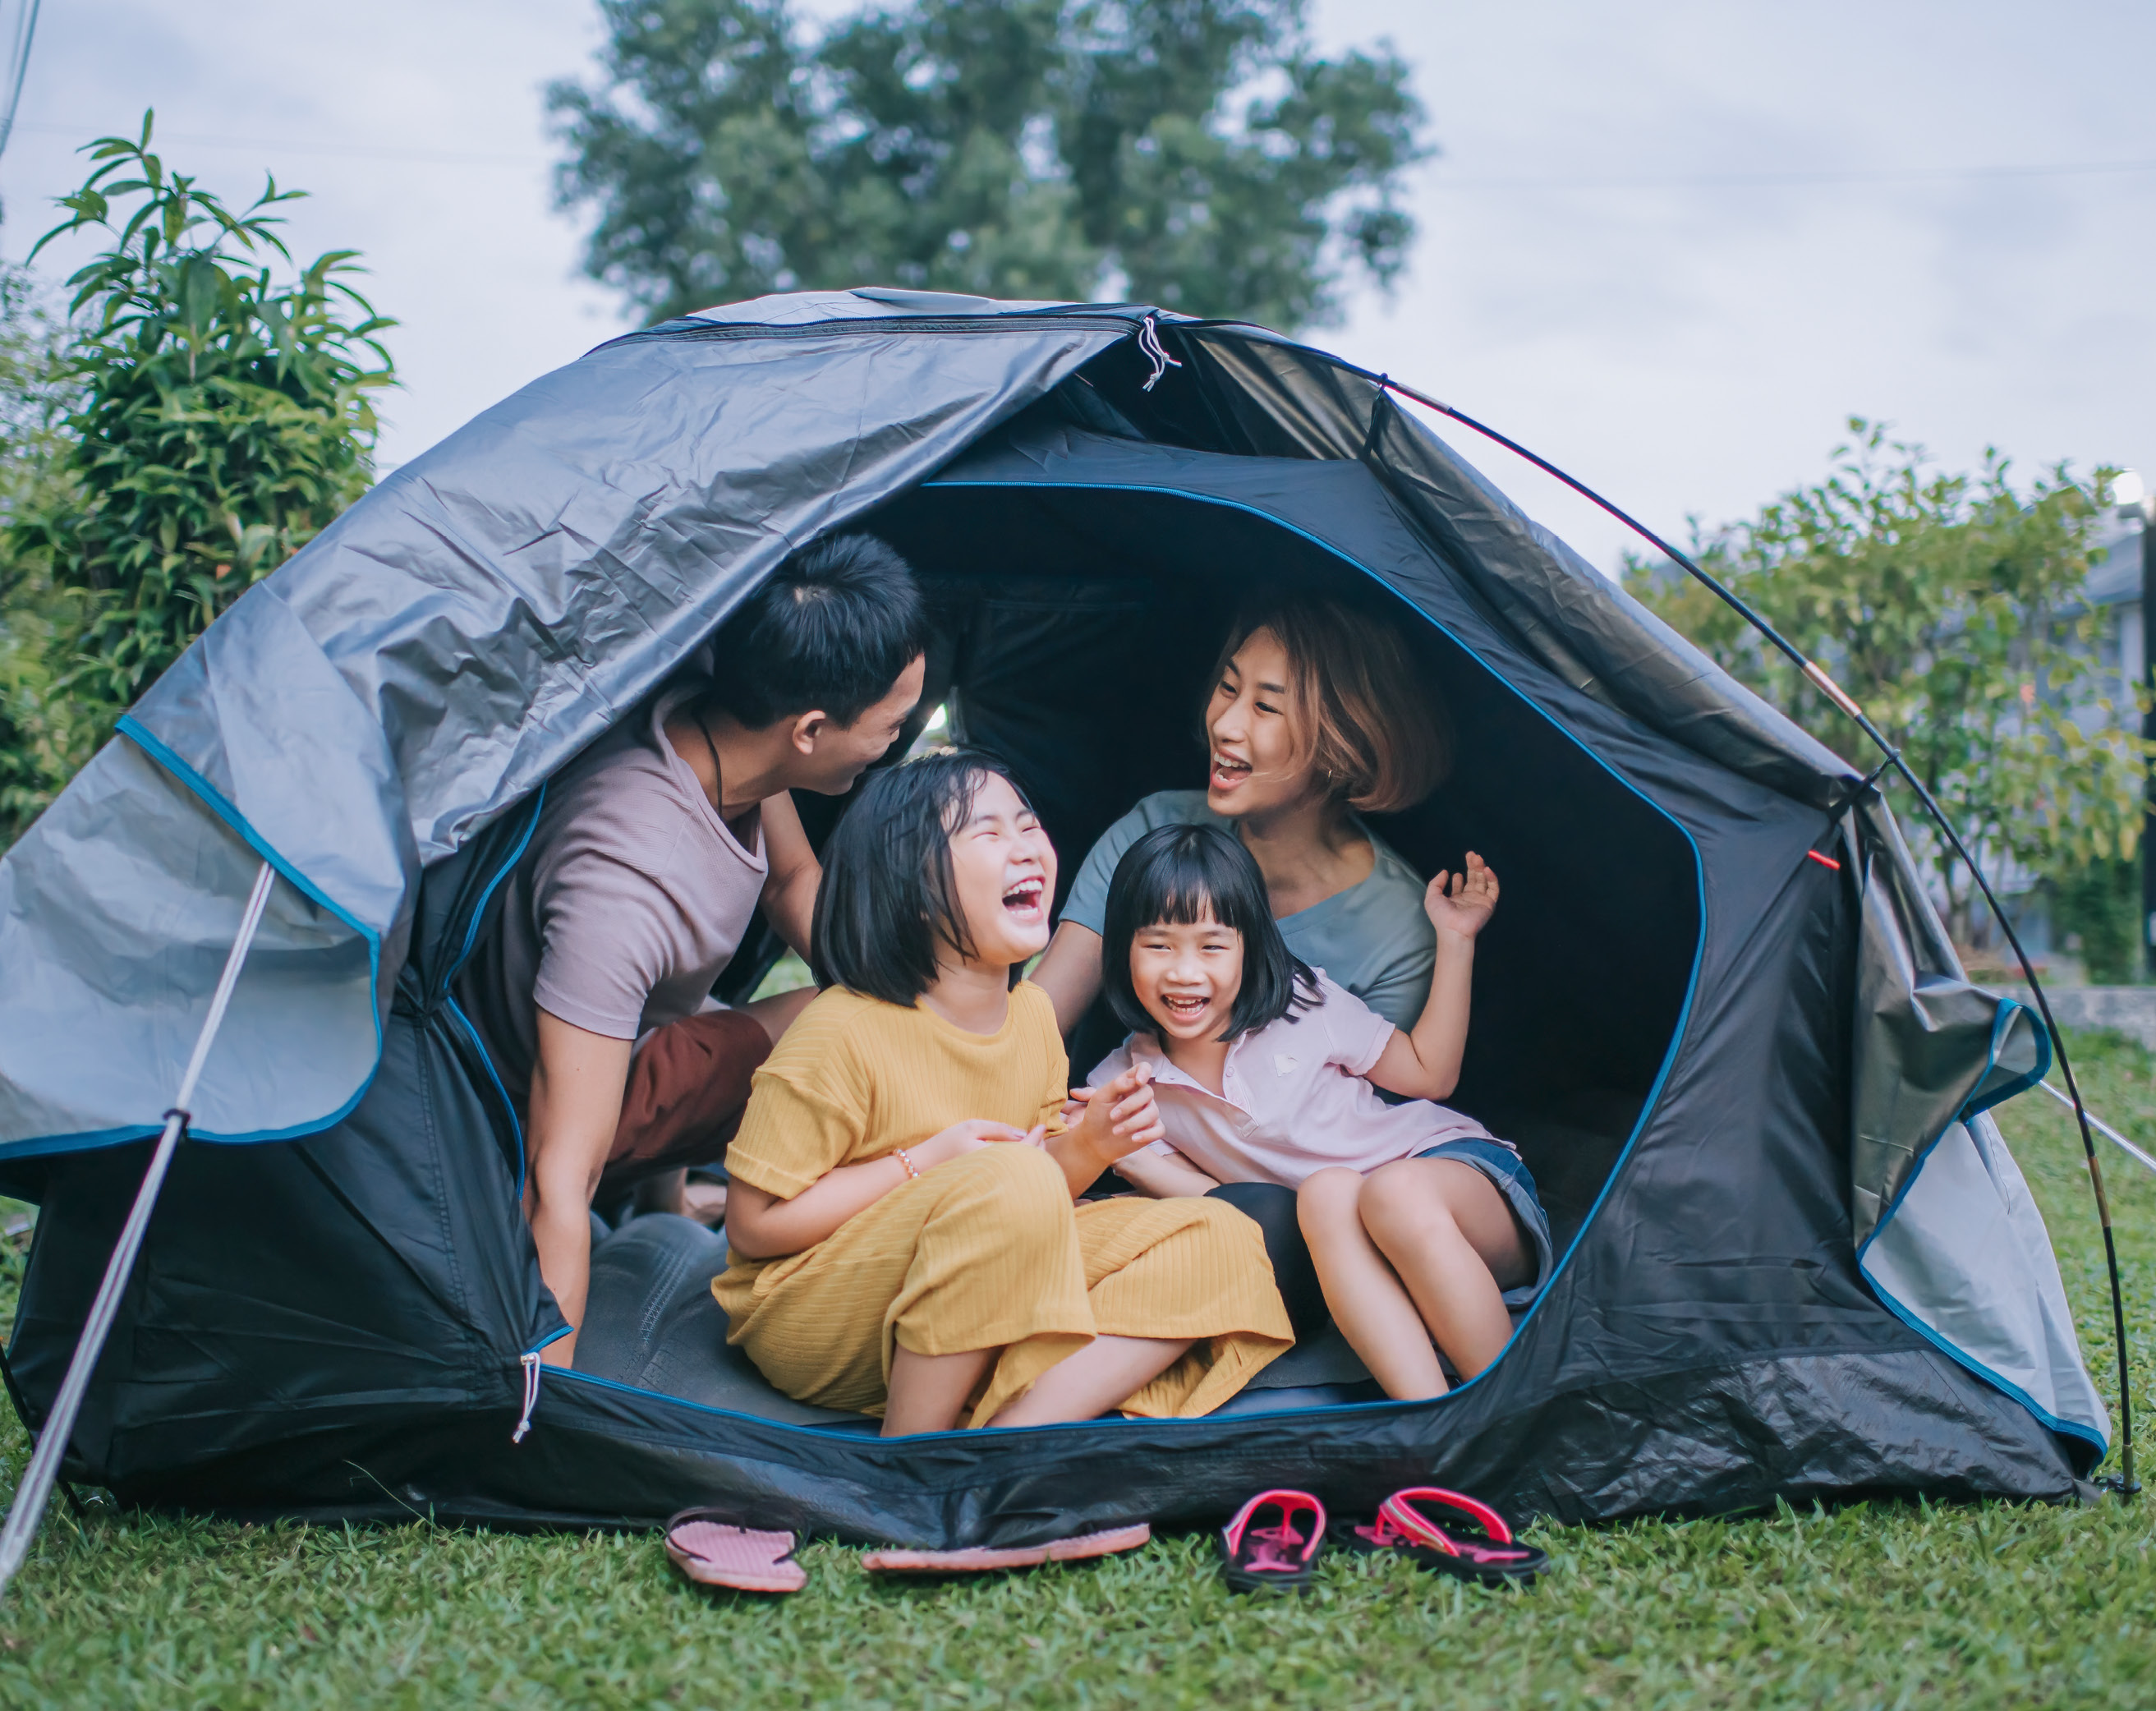 An Asian family laughs while sitting in a tent.